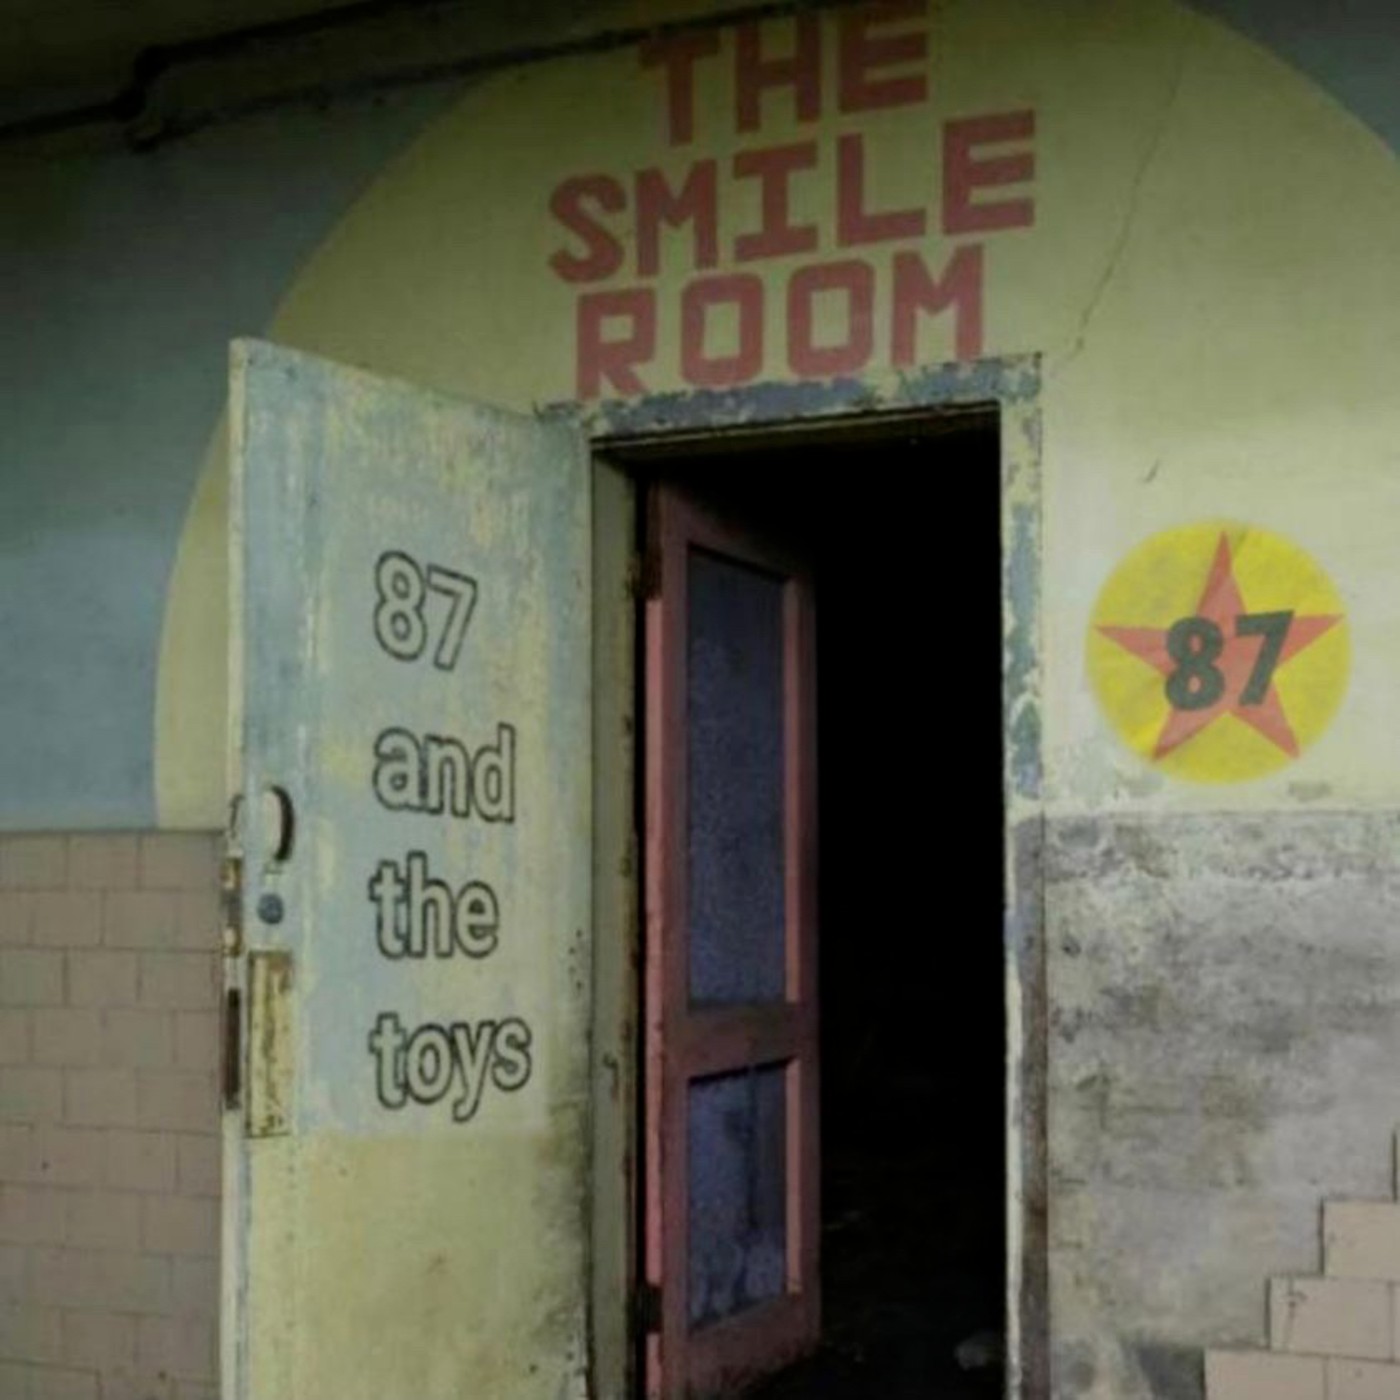 87 and the Toys ‘The Smile Room’ EP album artwork